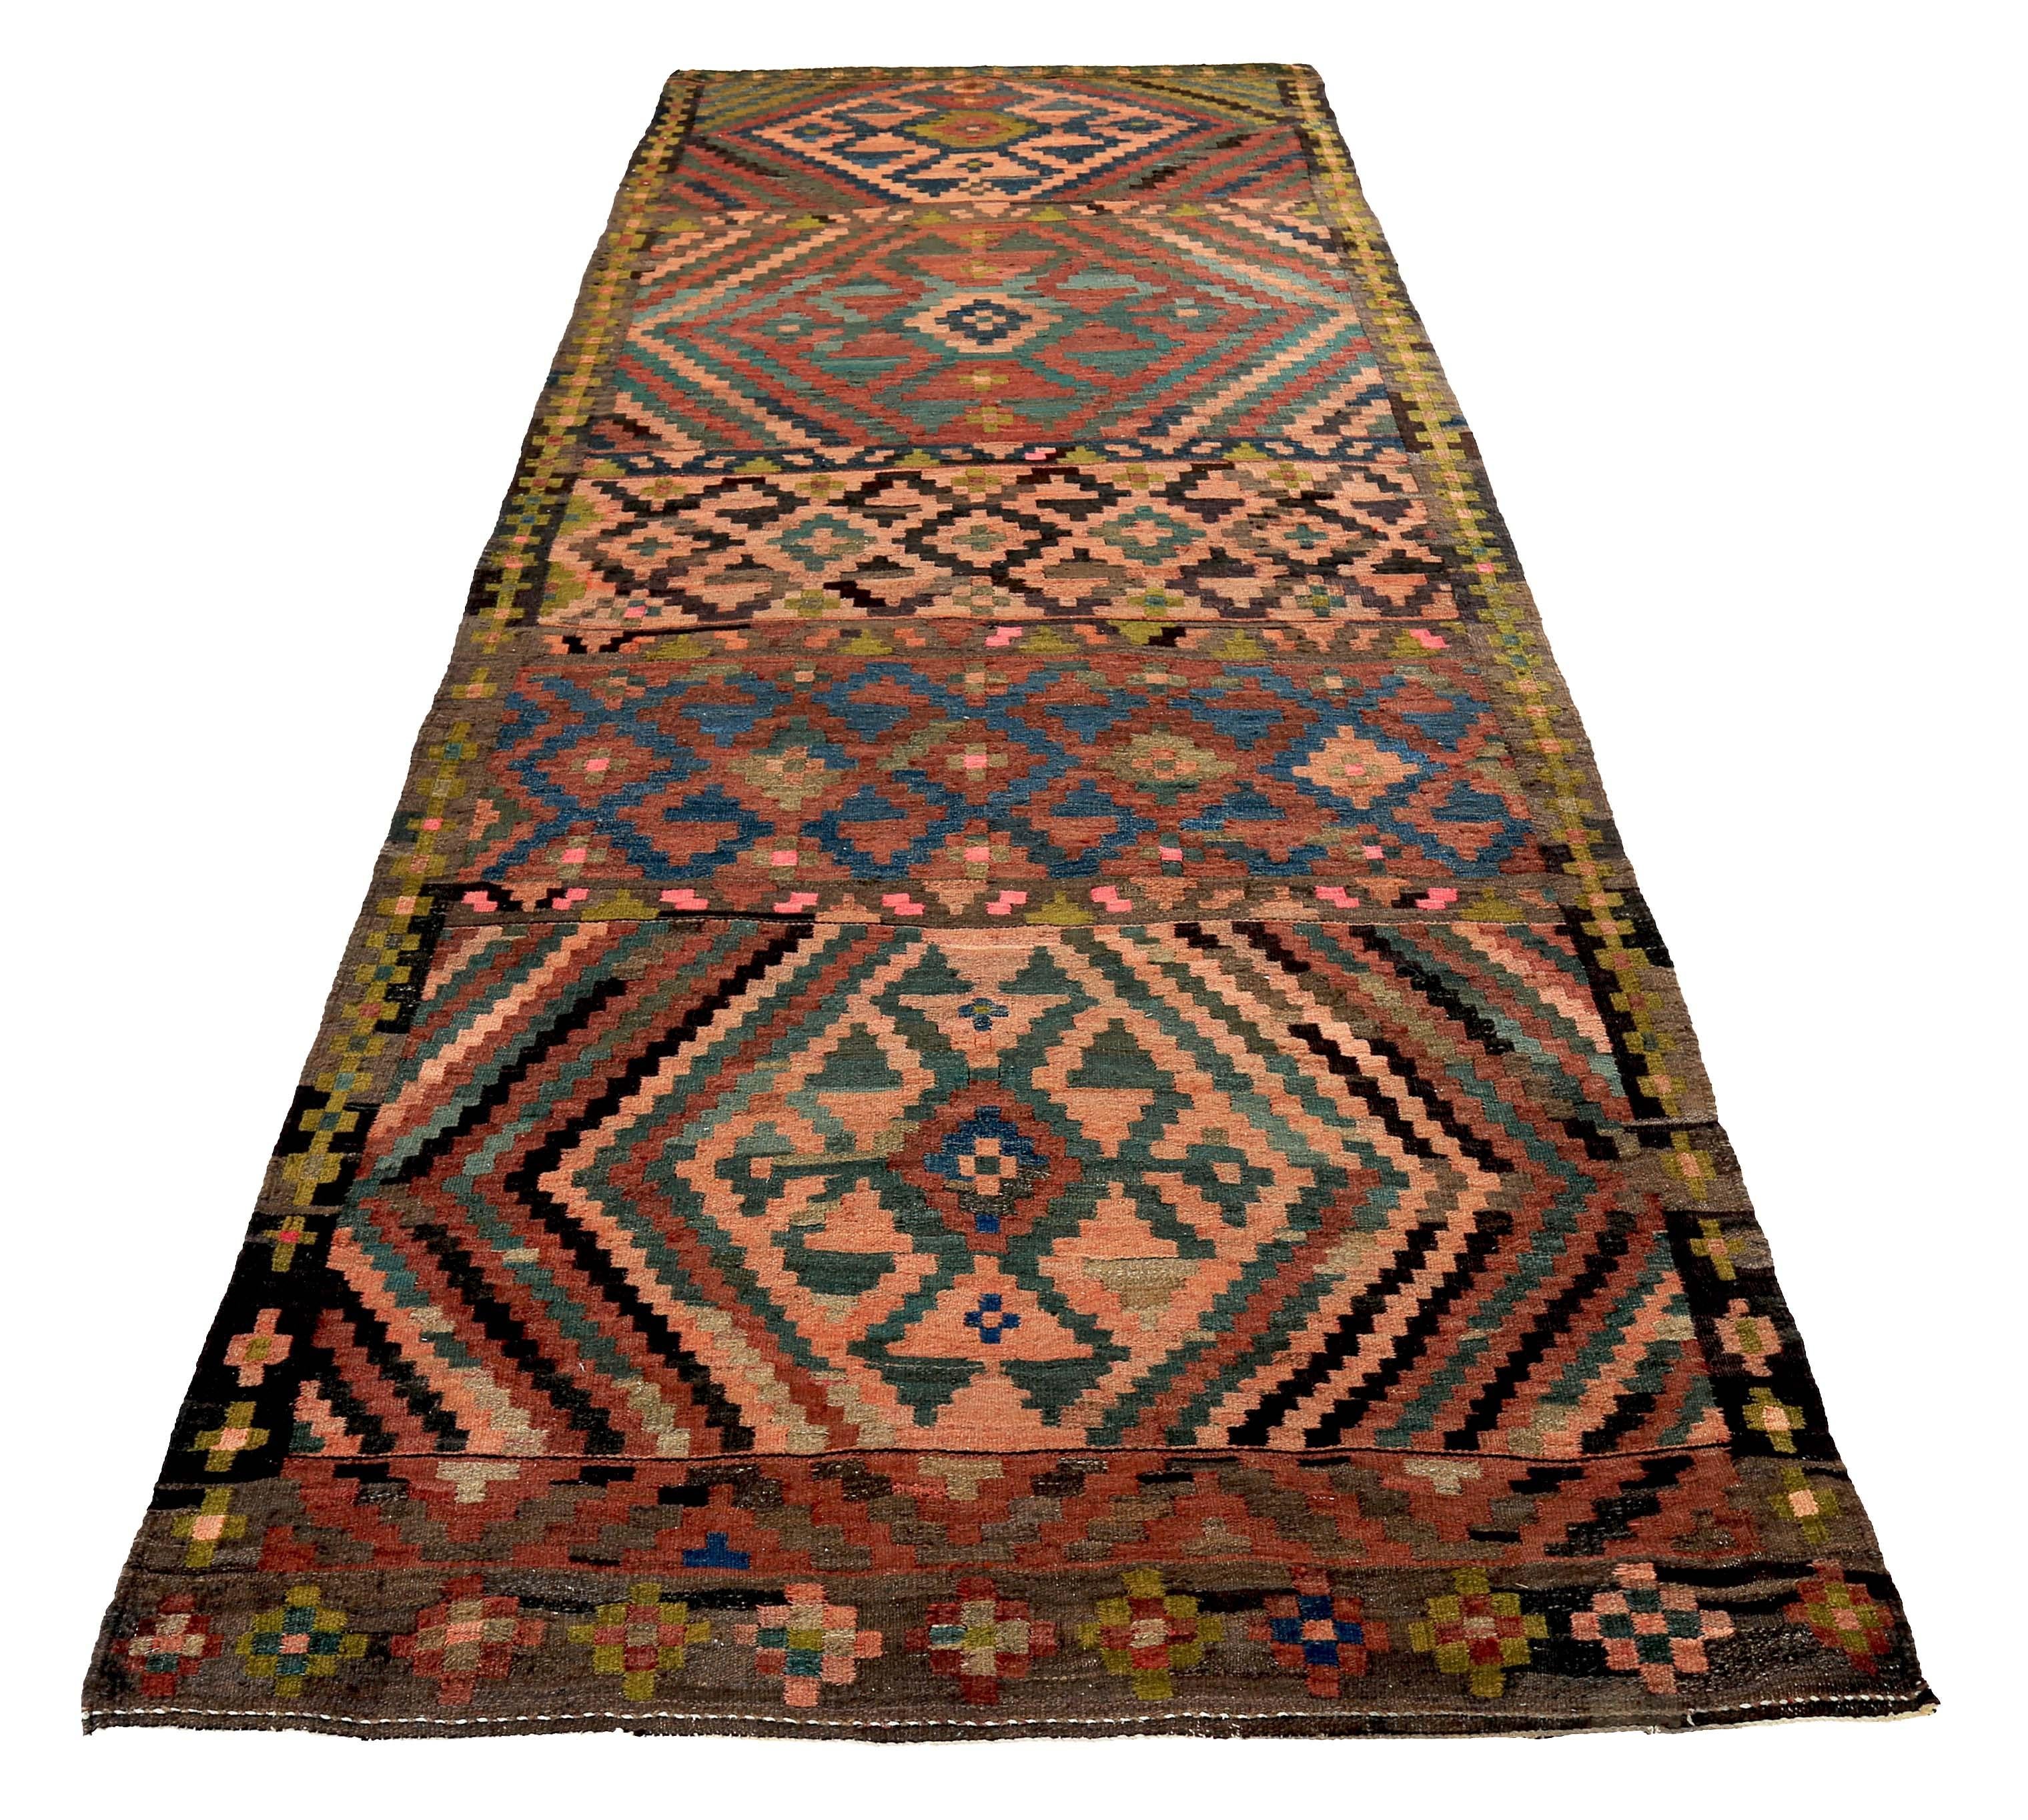 Turkish runner rug handwoven from the finest sheep’s wool and colored with all-natural vegetable dyes that are safe for humans and pets. It’s a traditional Kilim flat-weave design featuring pink and green tribal details over a rich brown field. It’s